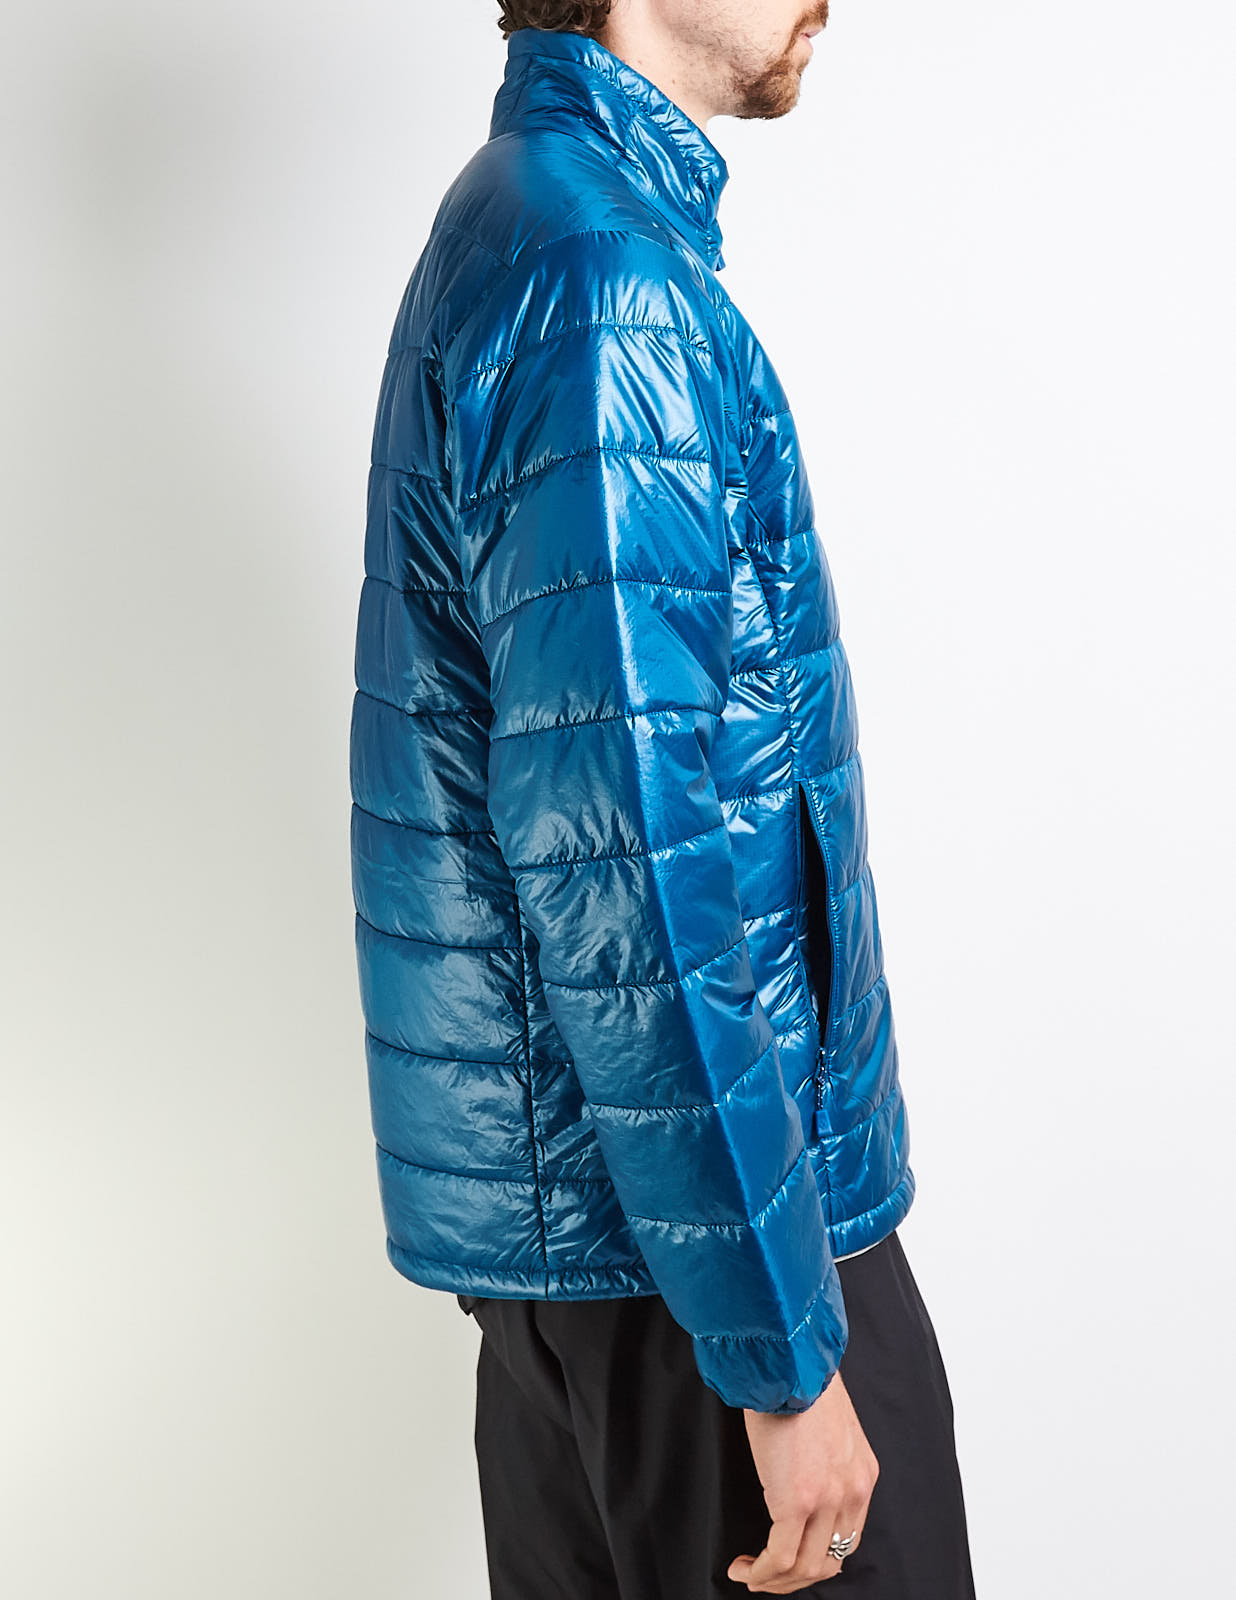 Thermawrap Classic Jacket in Blue Acide